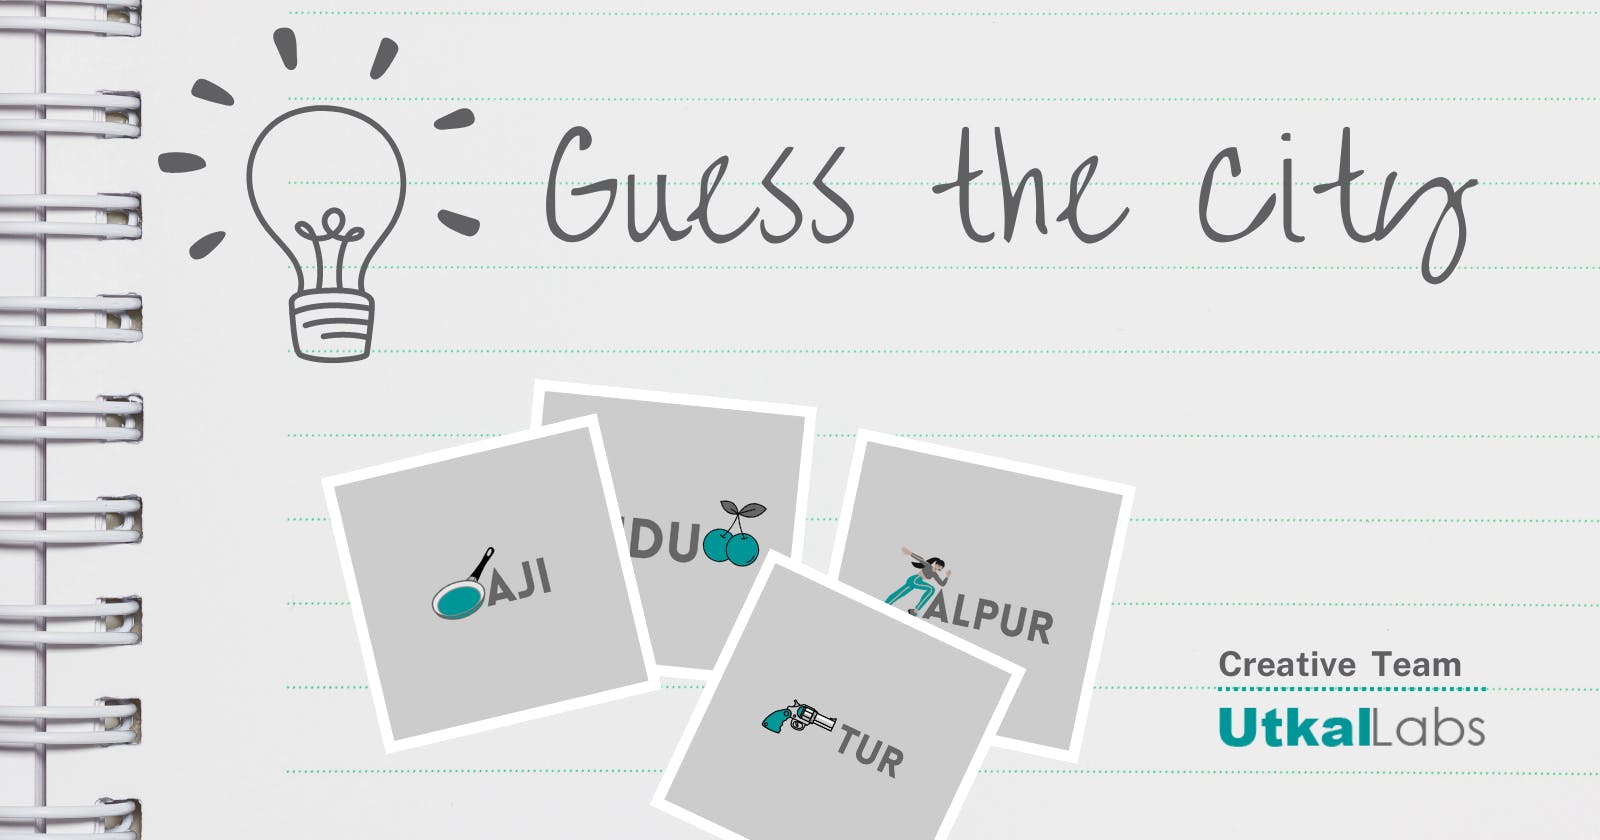 Fun Challenge - Guess the Indian city names from the icons & phrases.